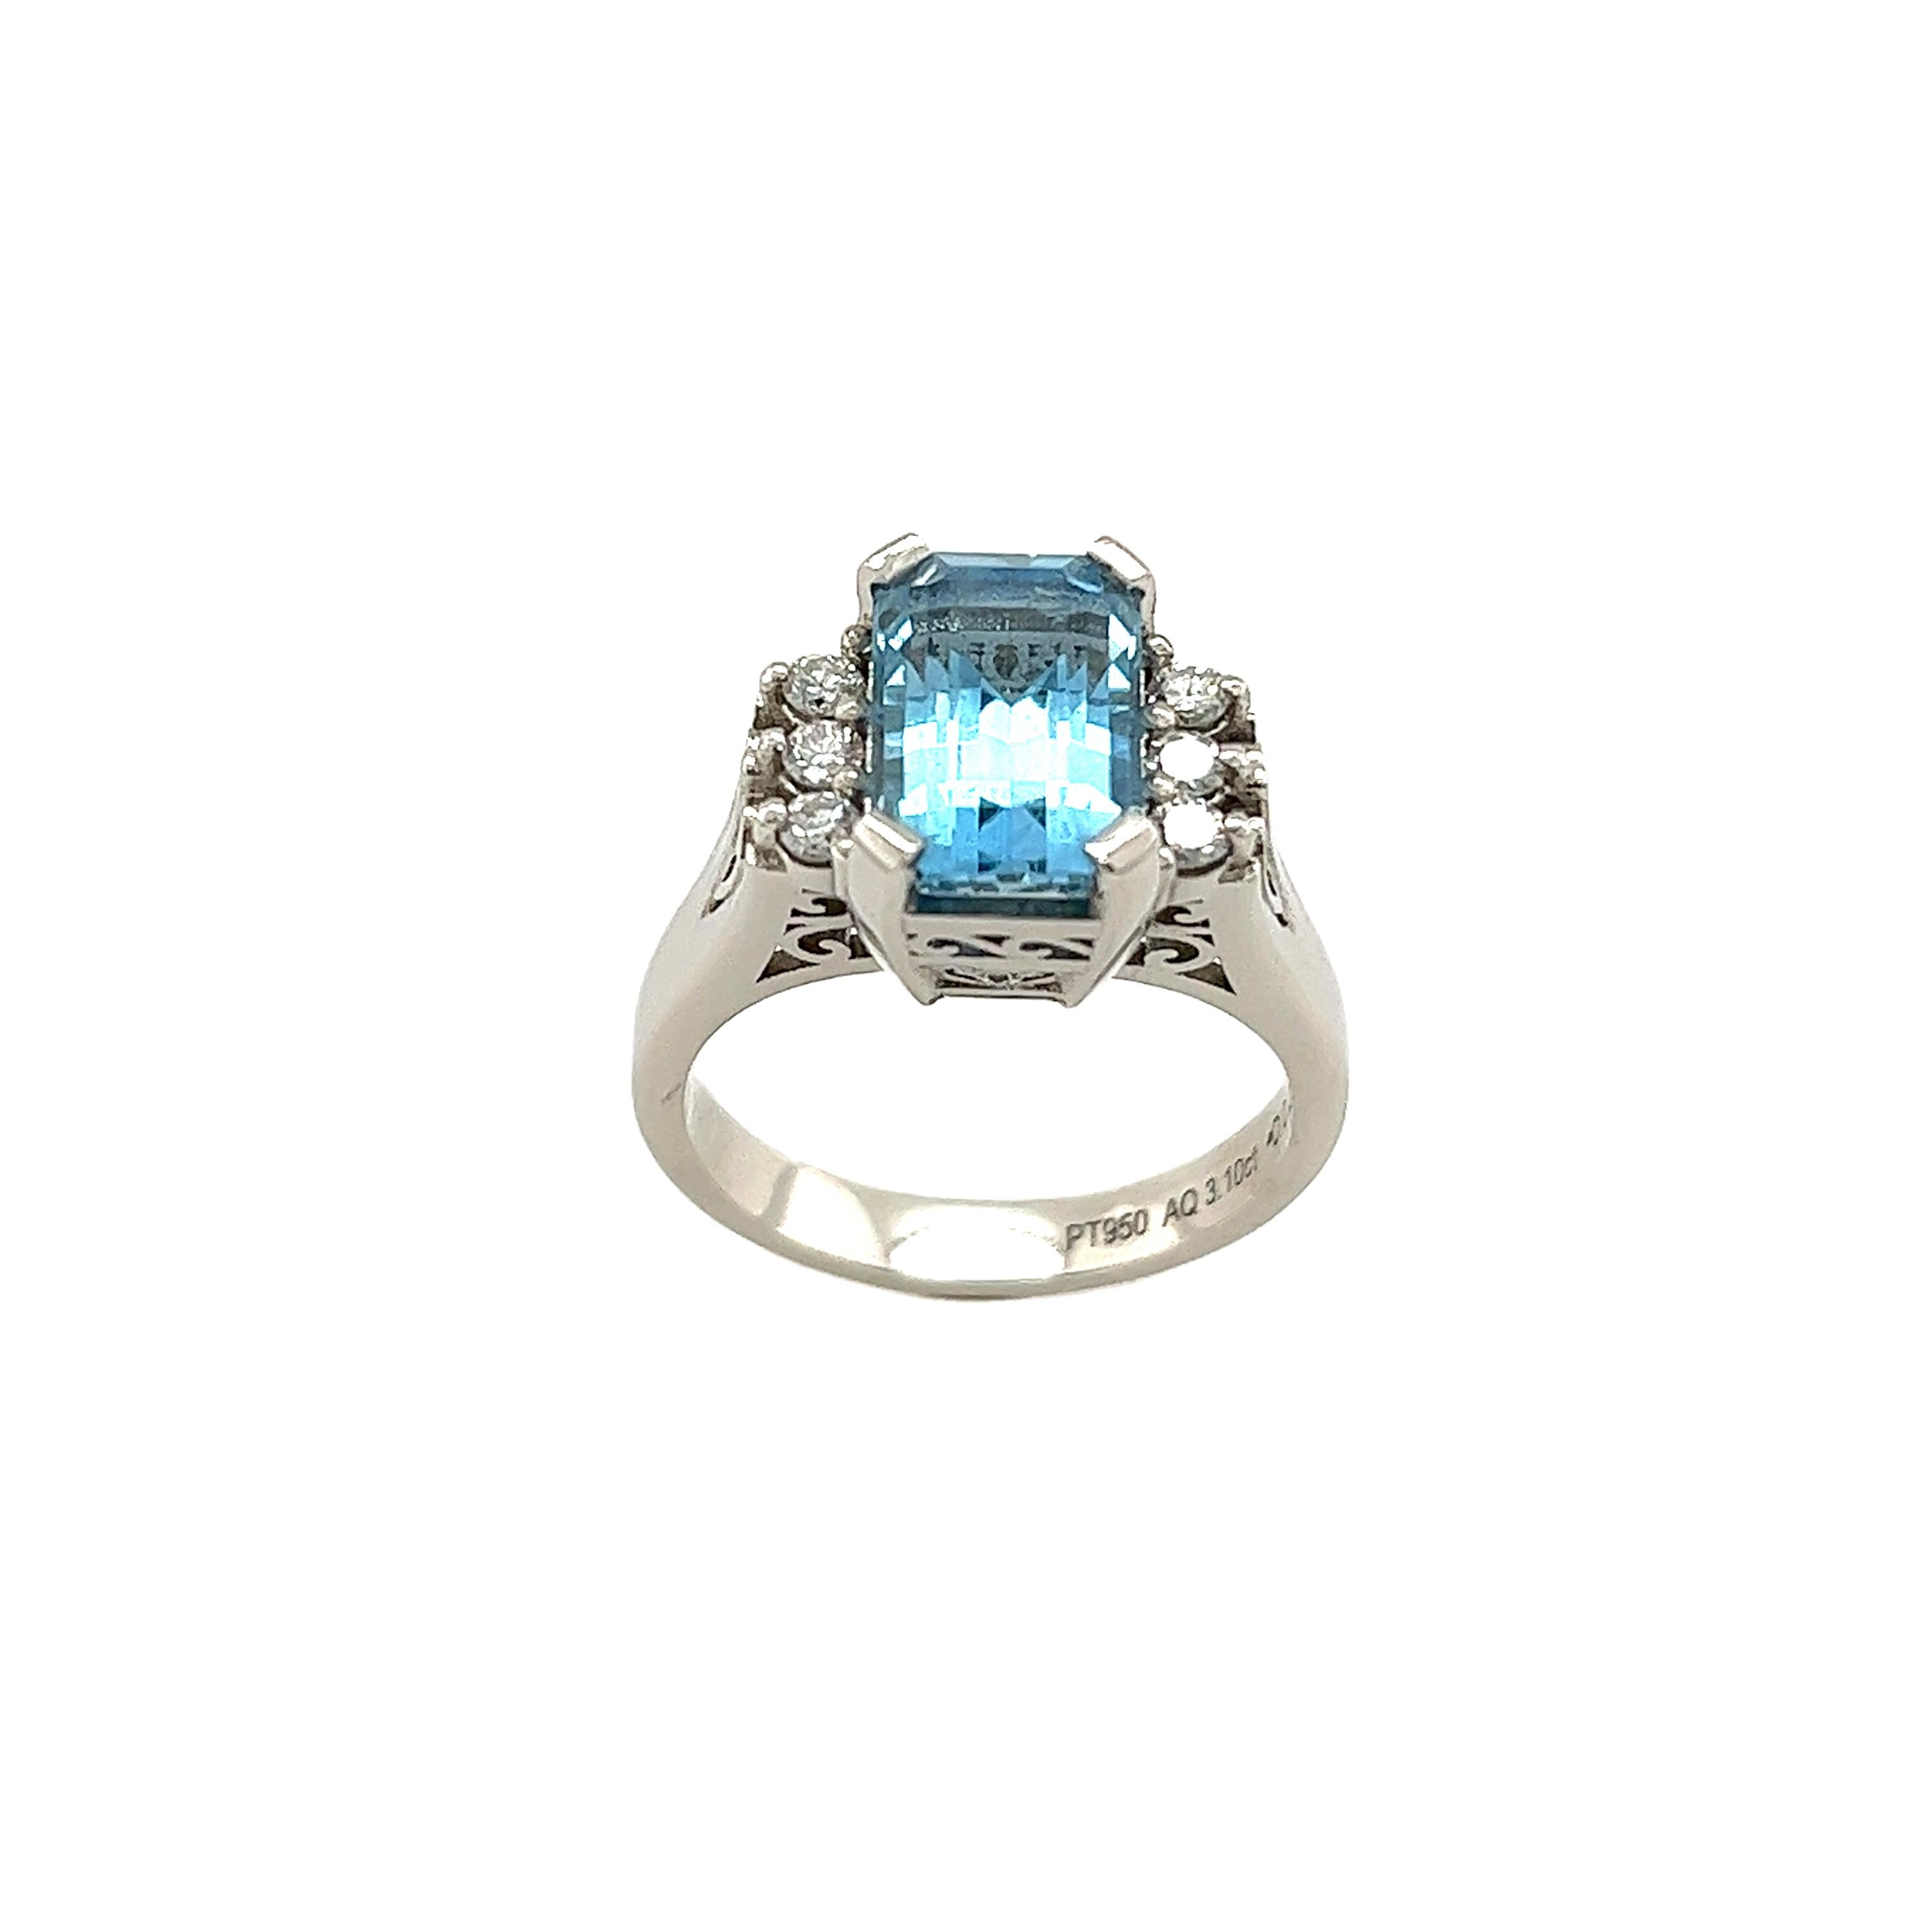 Triple AAA Emerald Cut 3.10ct Aquamarine Ring w/ 3 Diamonds on Sides in Platinum For Sale 3